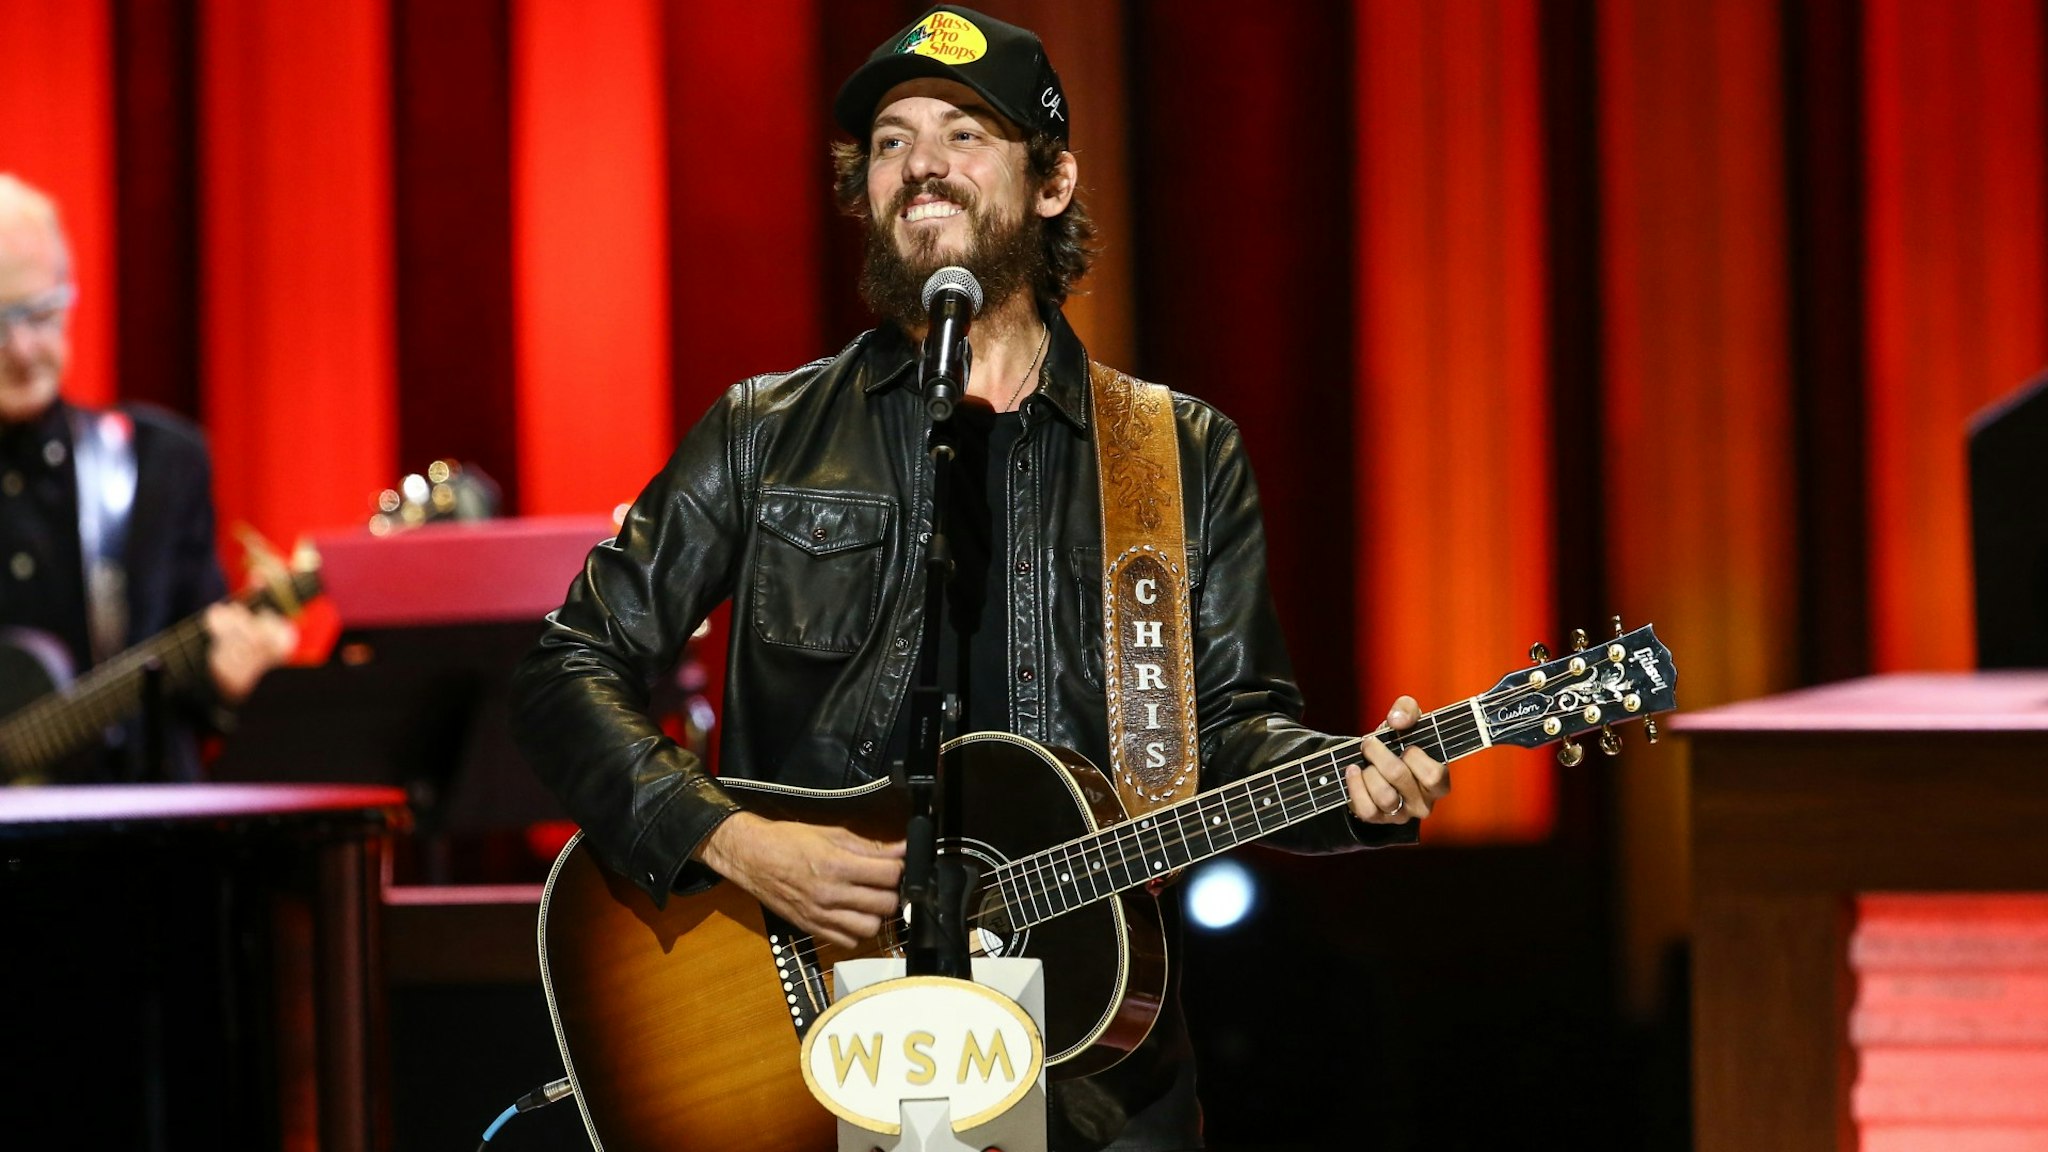  Chris Janson performs on stage during the Grand Ole Opry's 5000th Show at The Grand Ole Opry on October 30, 2021 in Nashville, Tennessee.